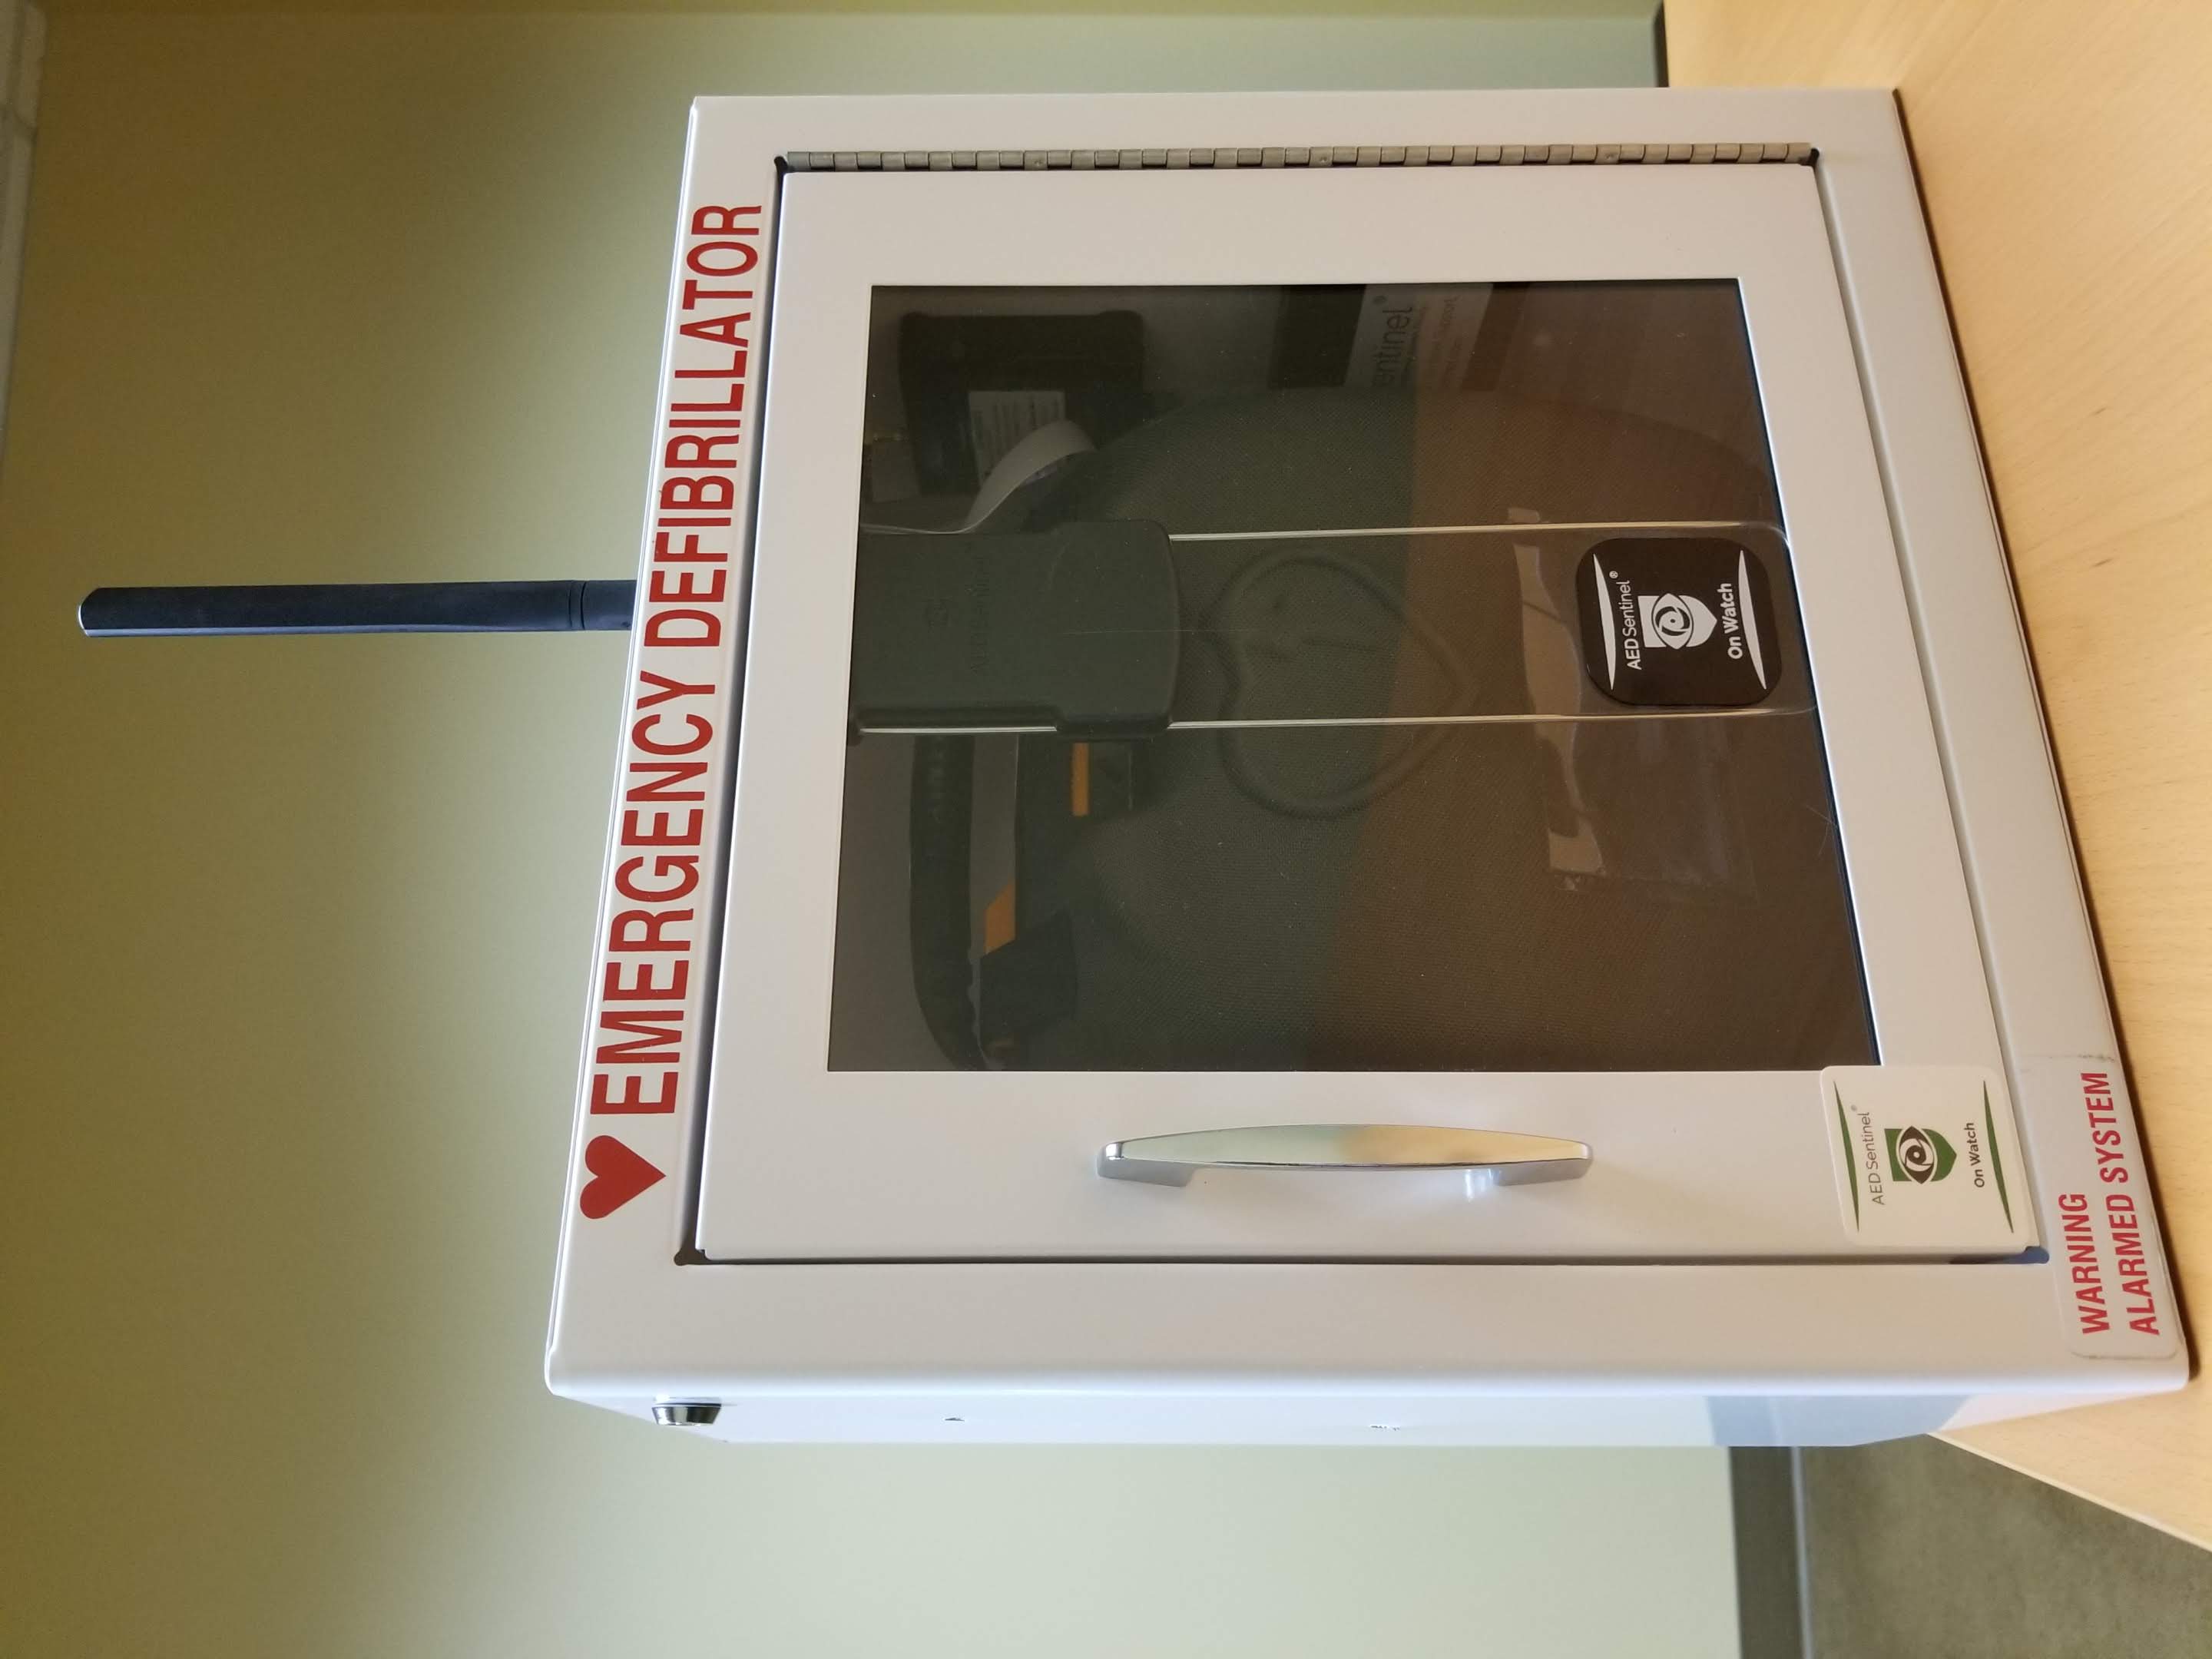 AED Sentinel monitors any AED in a wall cabinet.